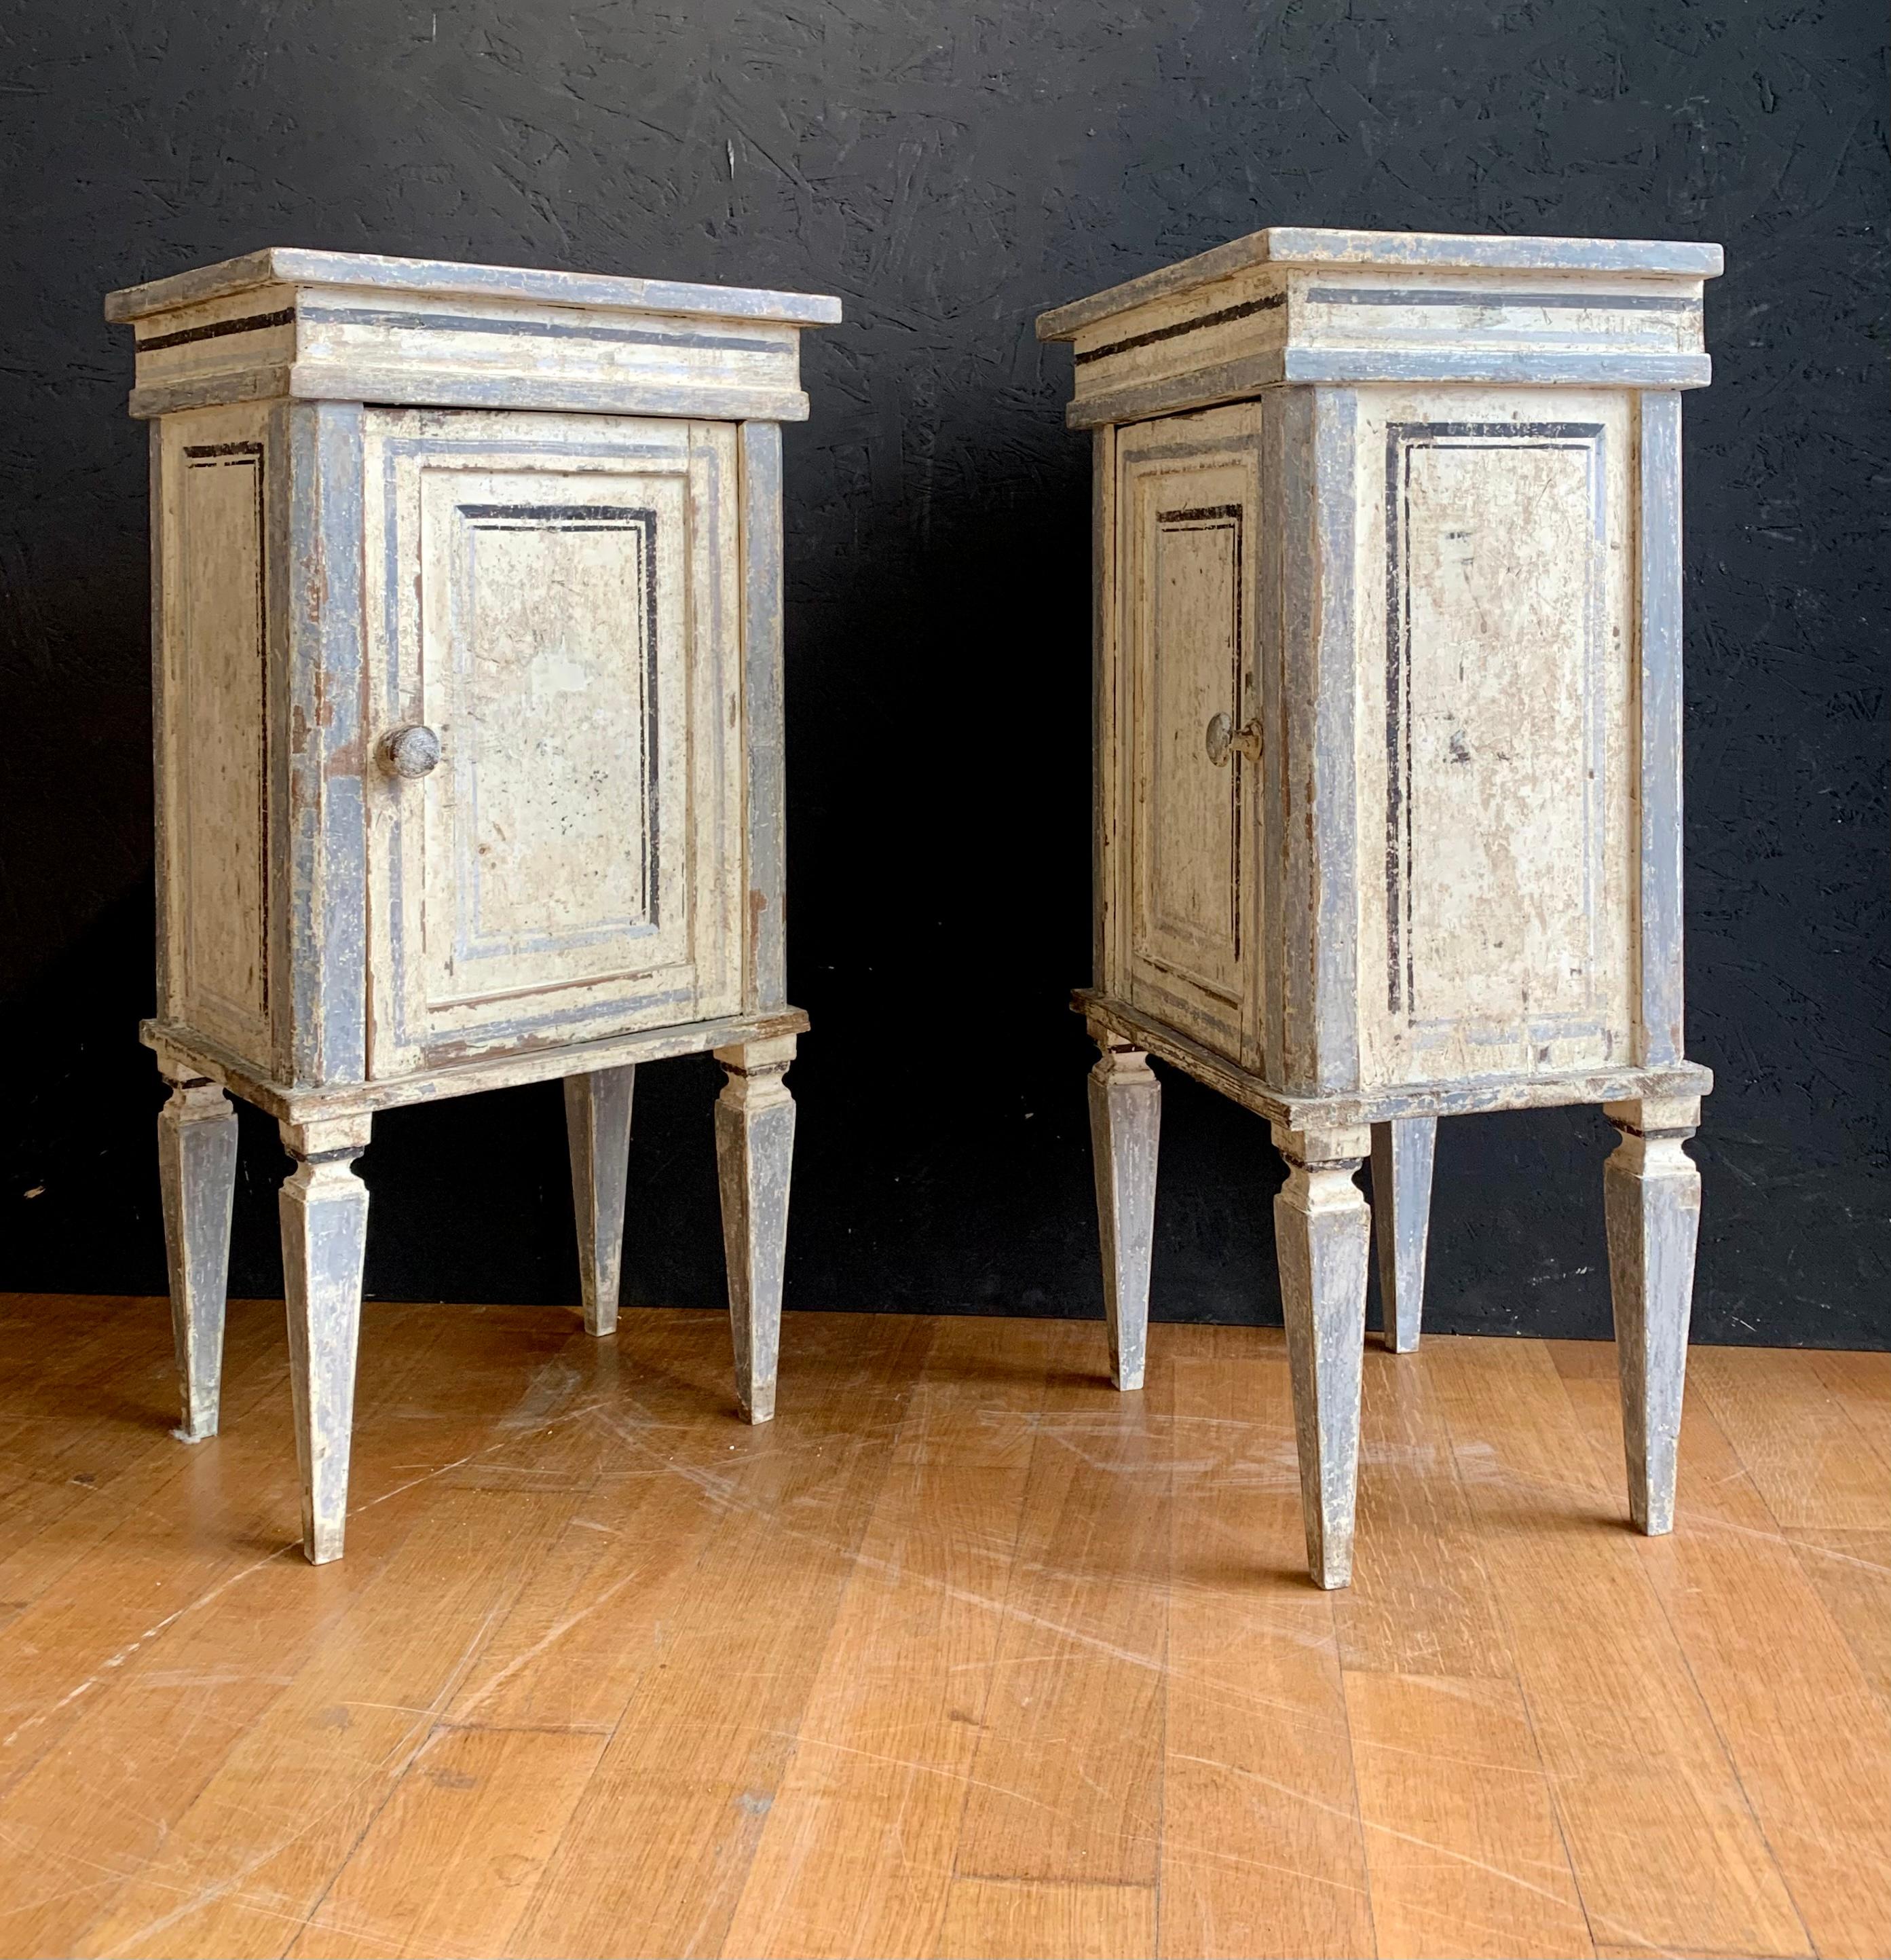 Hand-Painted 18th Century Pair of Painted Bedside Table